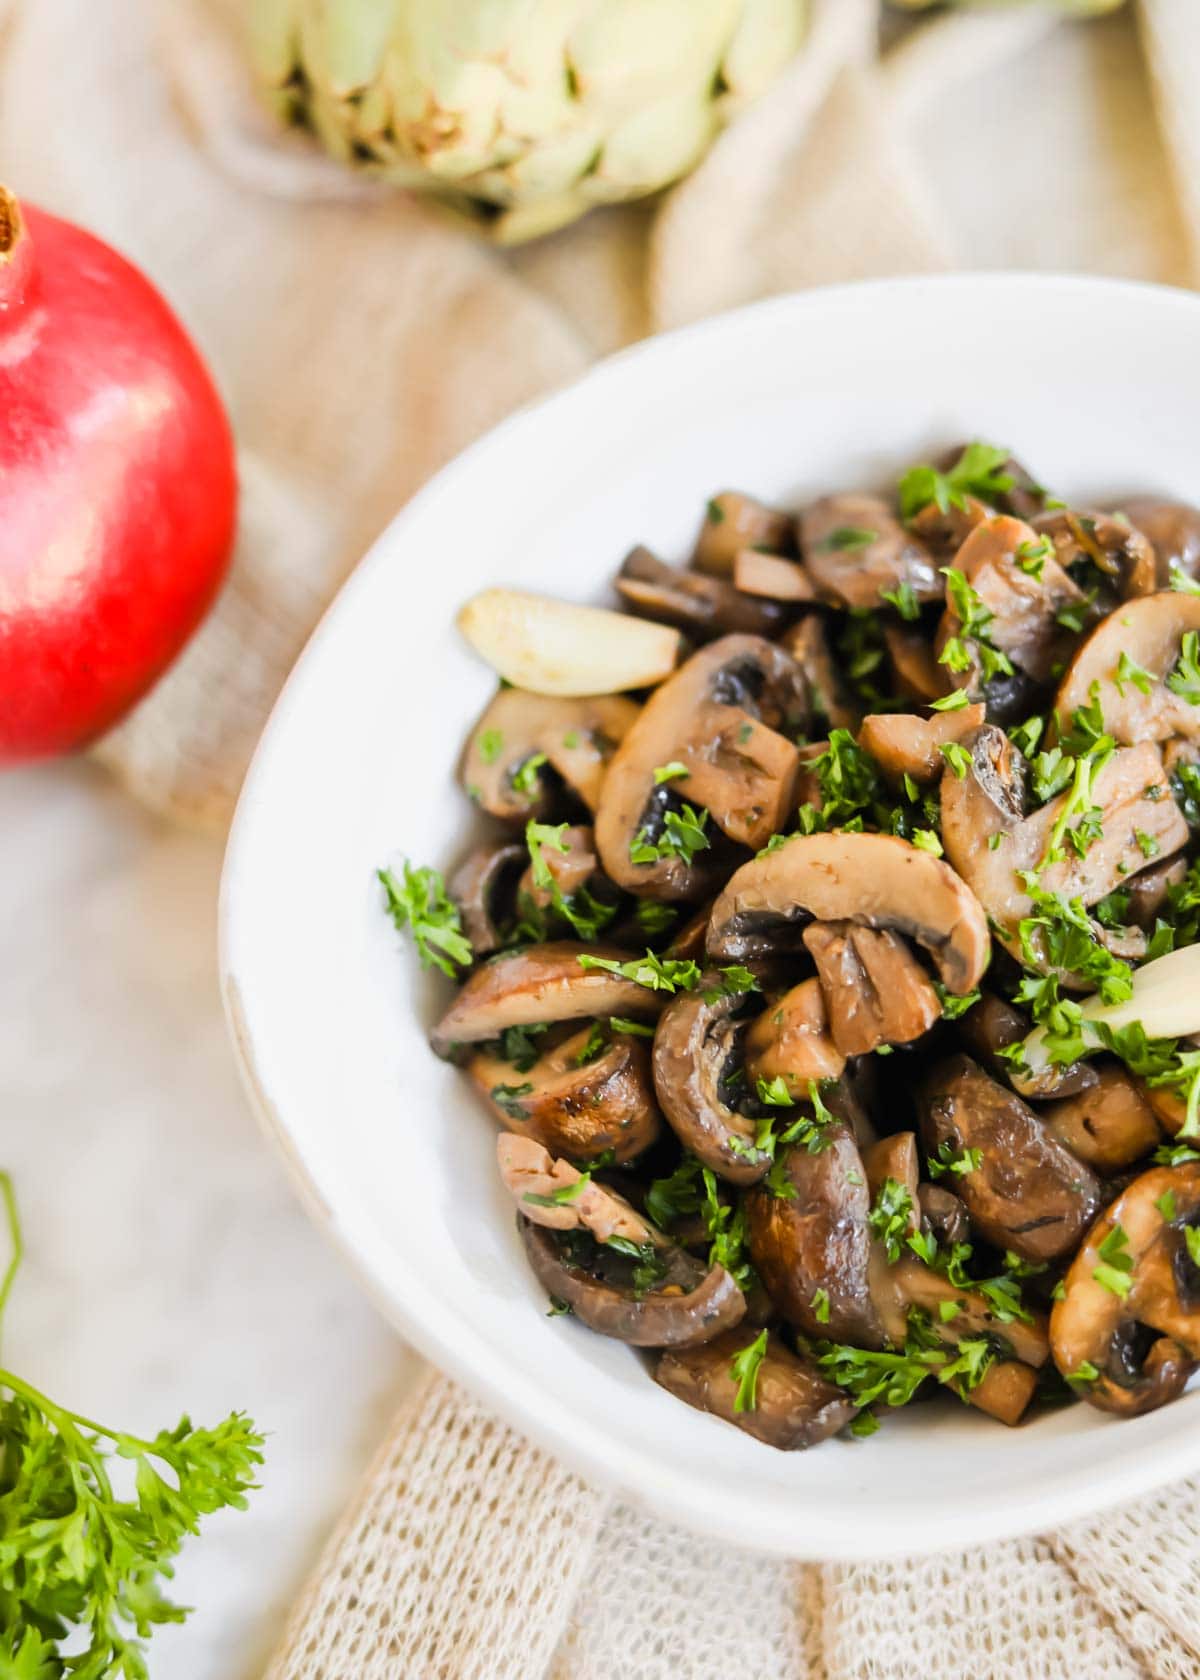 Sautéed mushrooms with White Wine in white bowl with parsley, garlic, and seasoning.